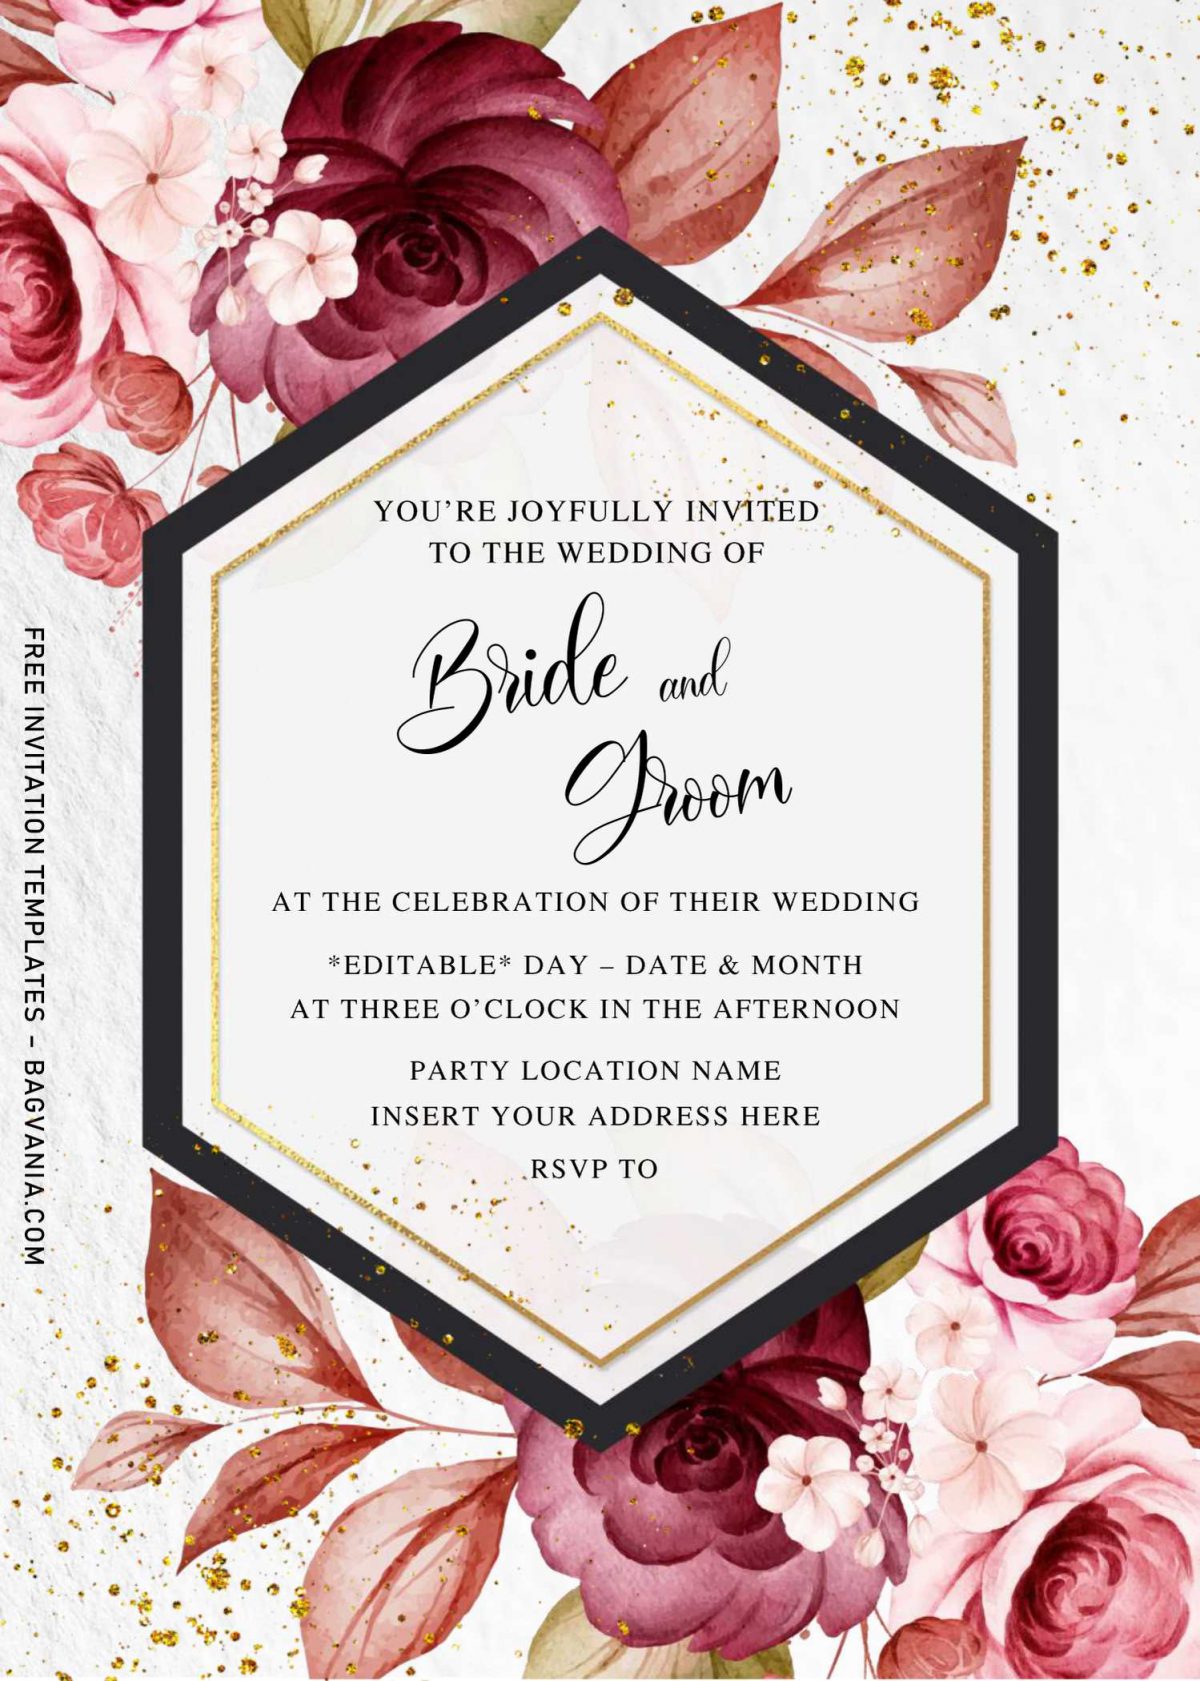 Free Burgundy Floral Wedding Invitation Templates For Word | FREE ...